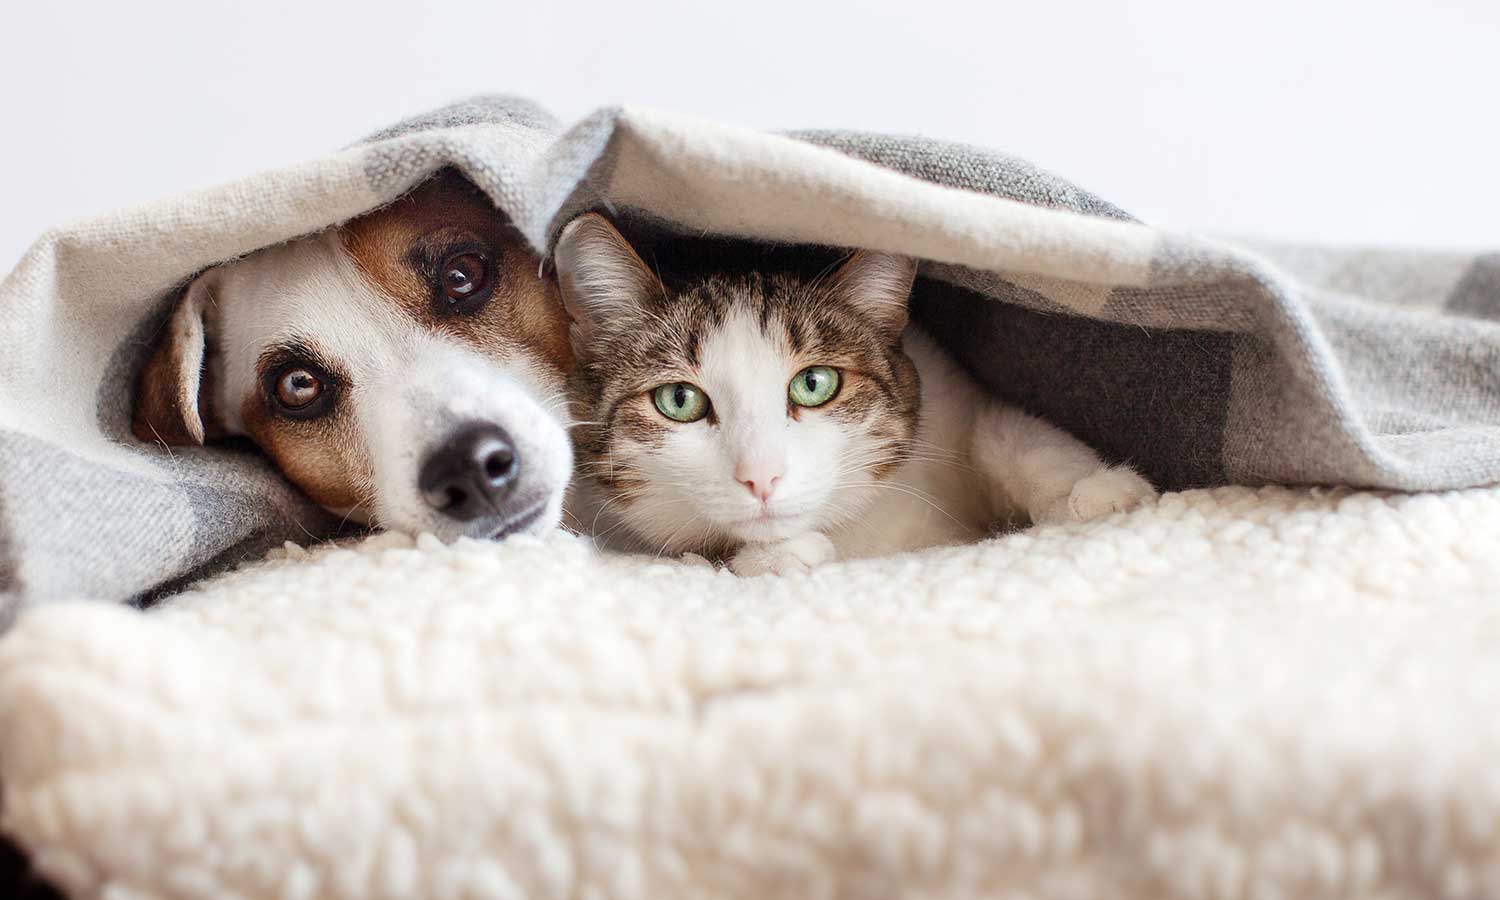 A dog and cat hiding under a blanket